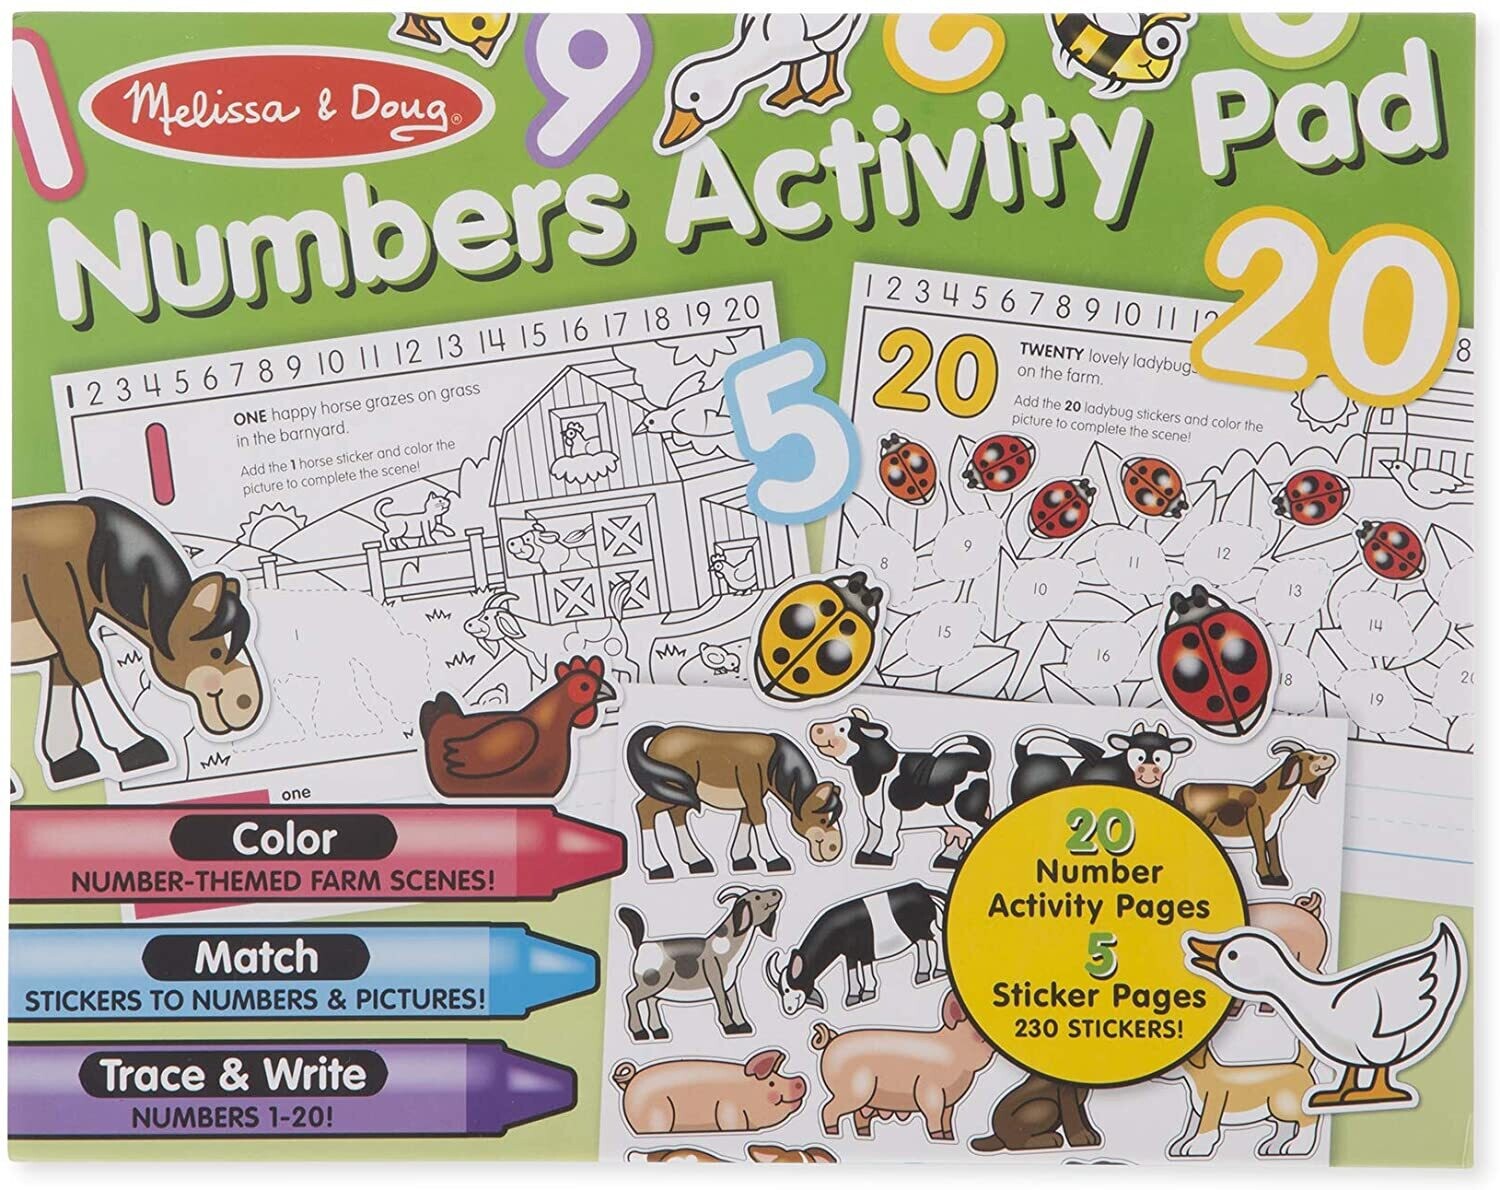 MD 8566 Numbers Activity Pad